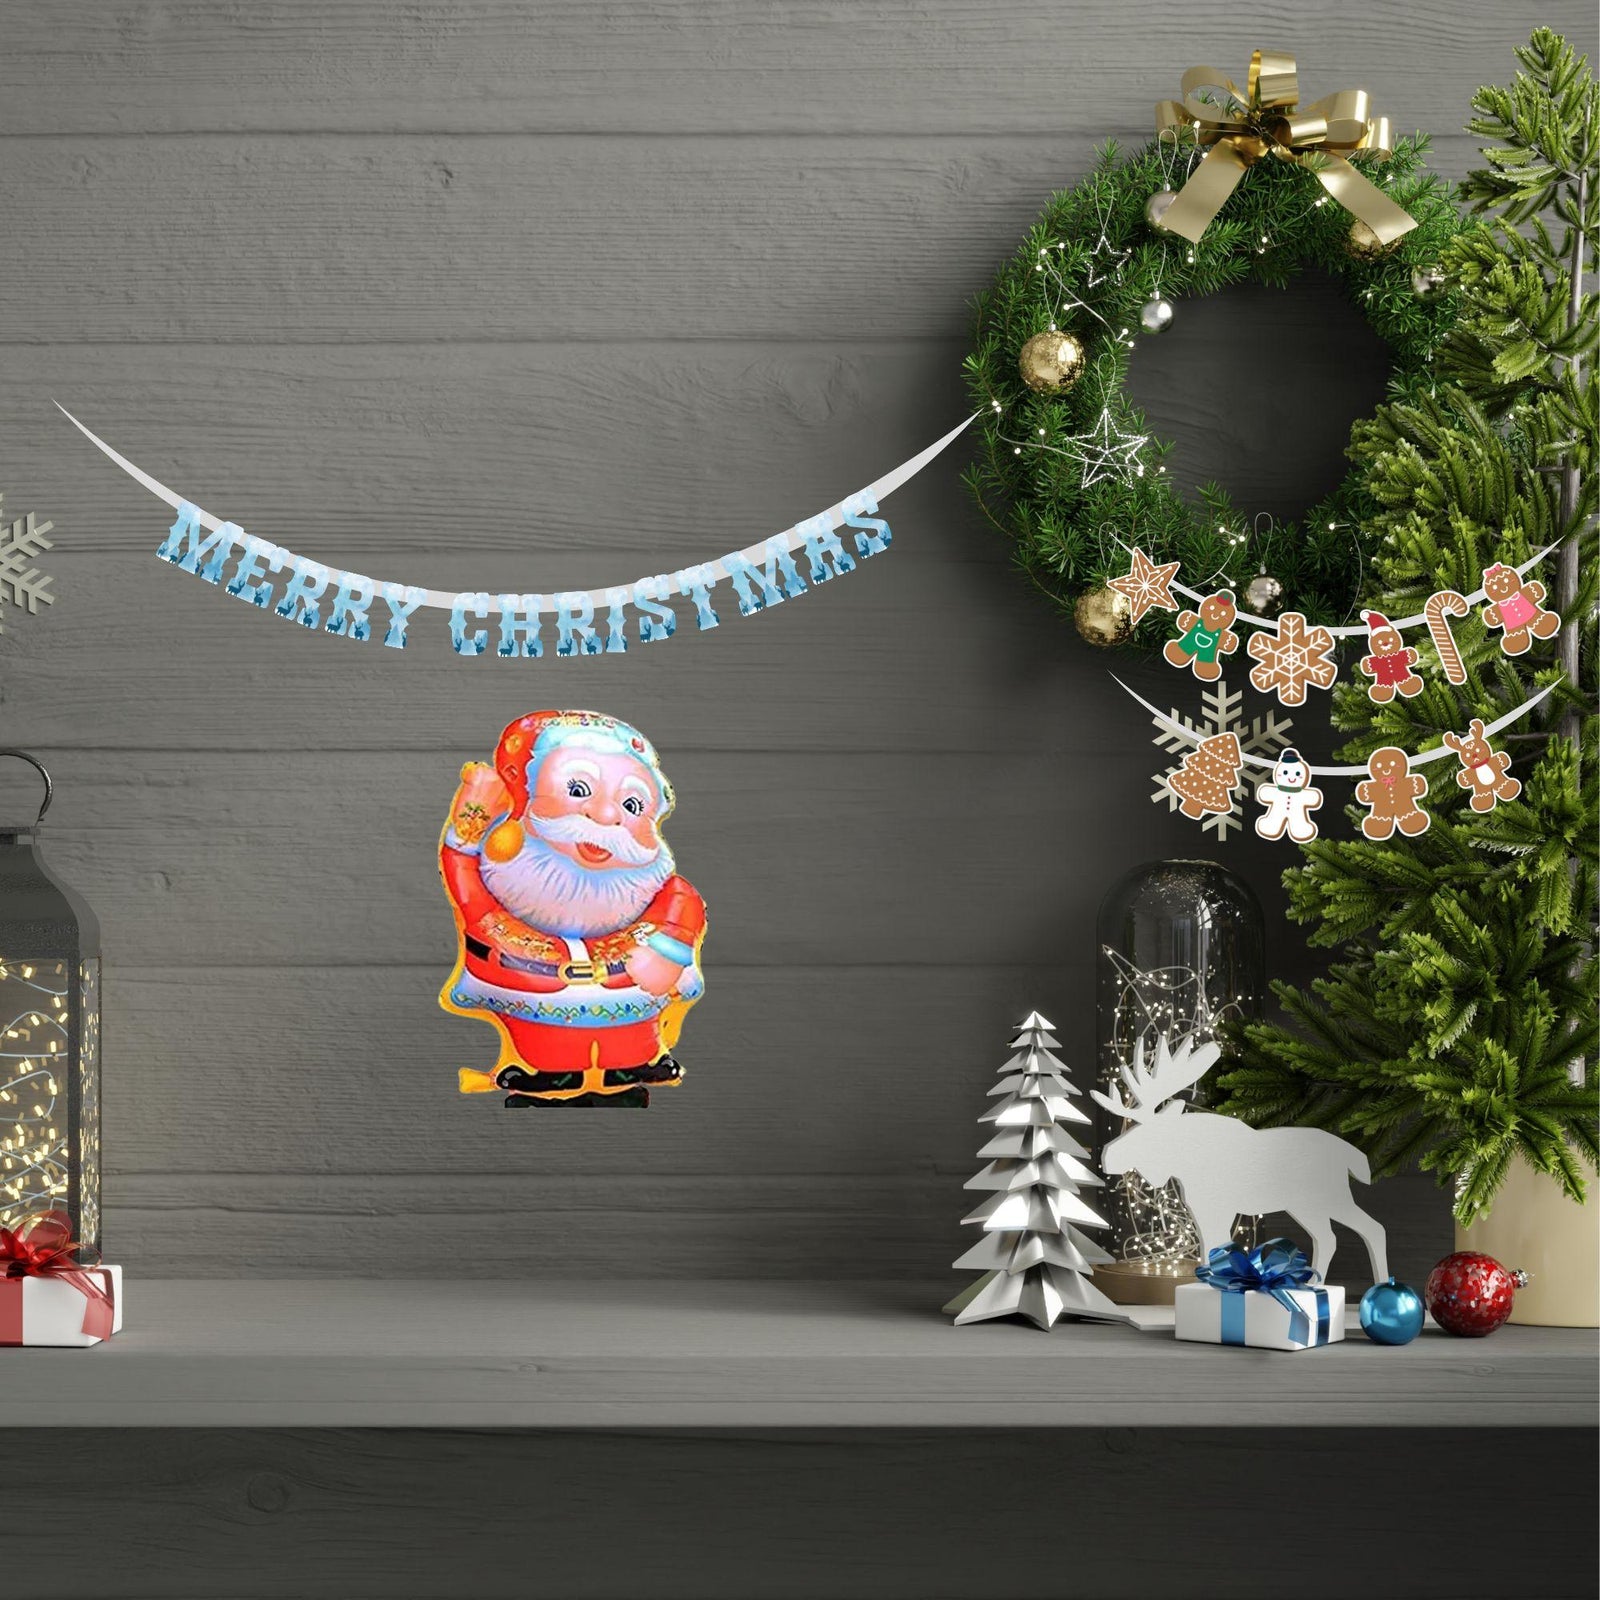 Merry Christmas Theme Decoration Kit- (6 inches/250 GSM Cardstock/Light Blue, White, Red, Brown/25 Pcs)